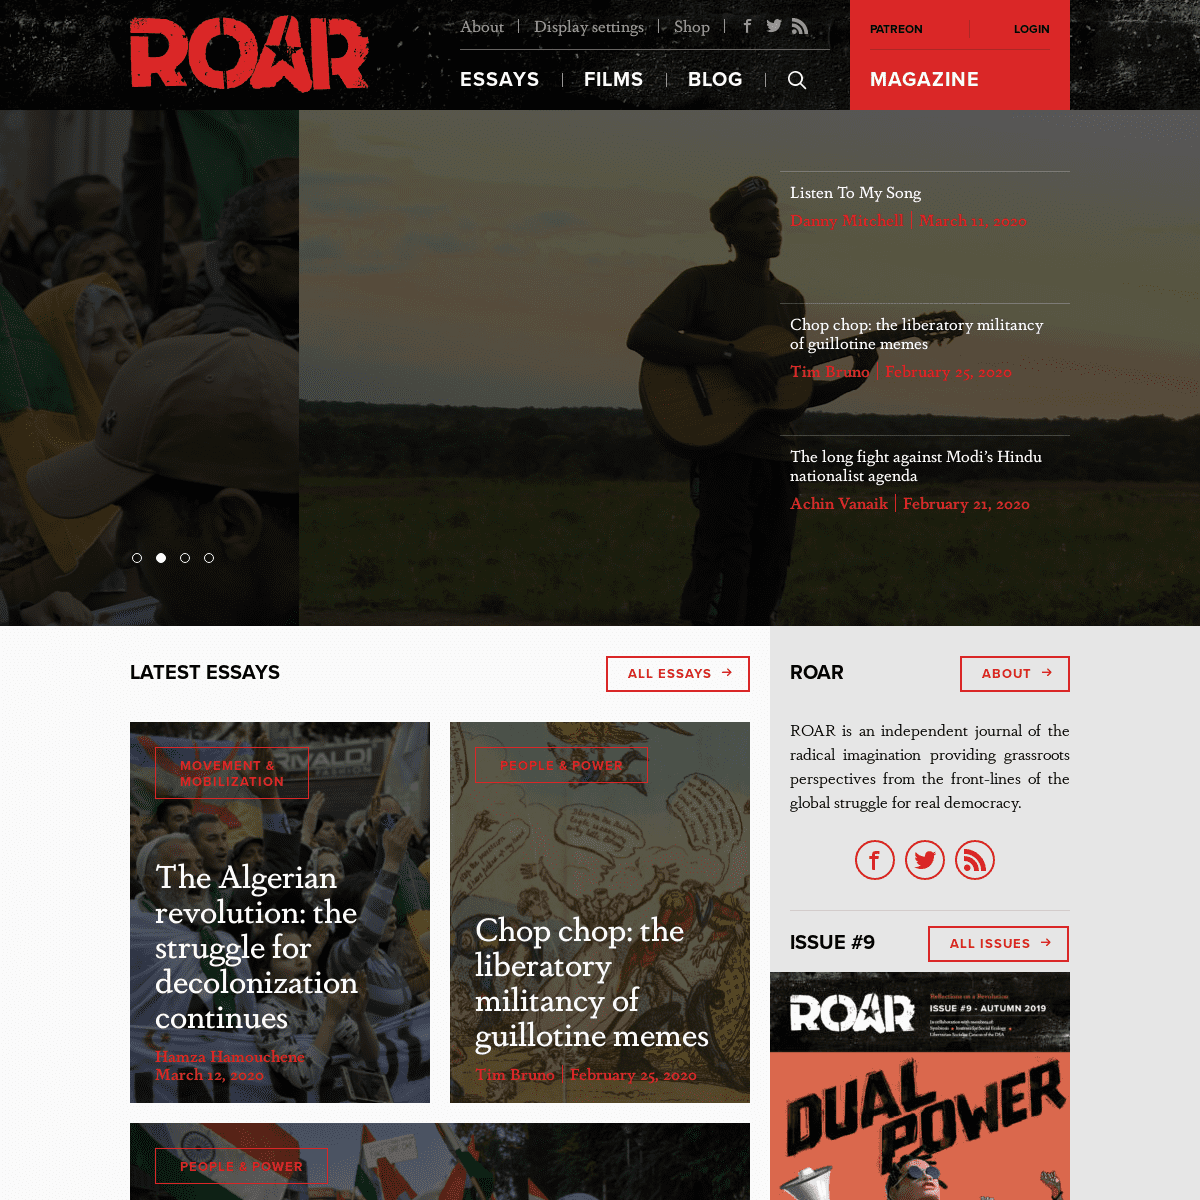 A complete backup of roarmag.org